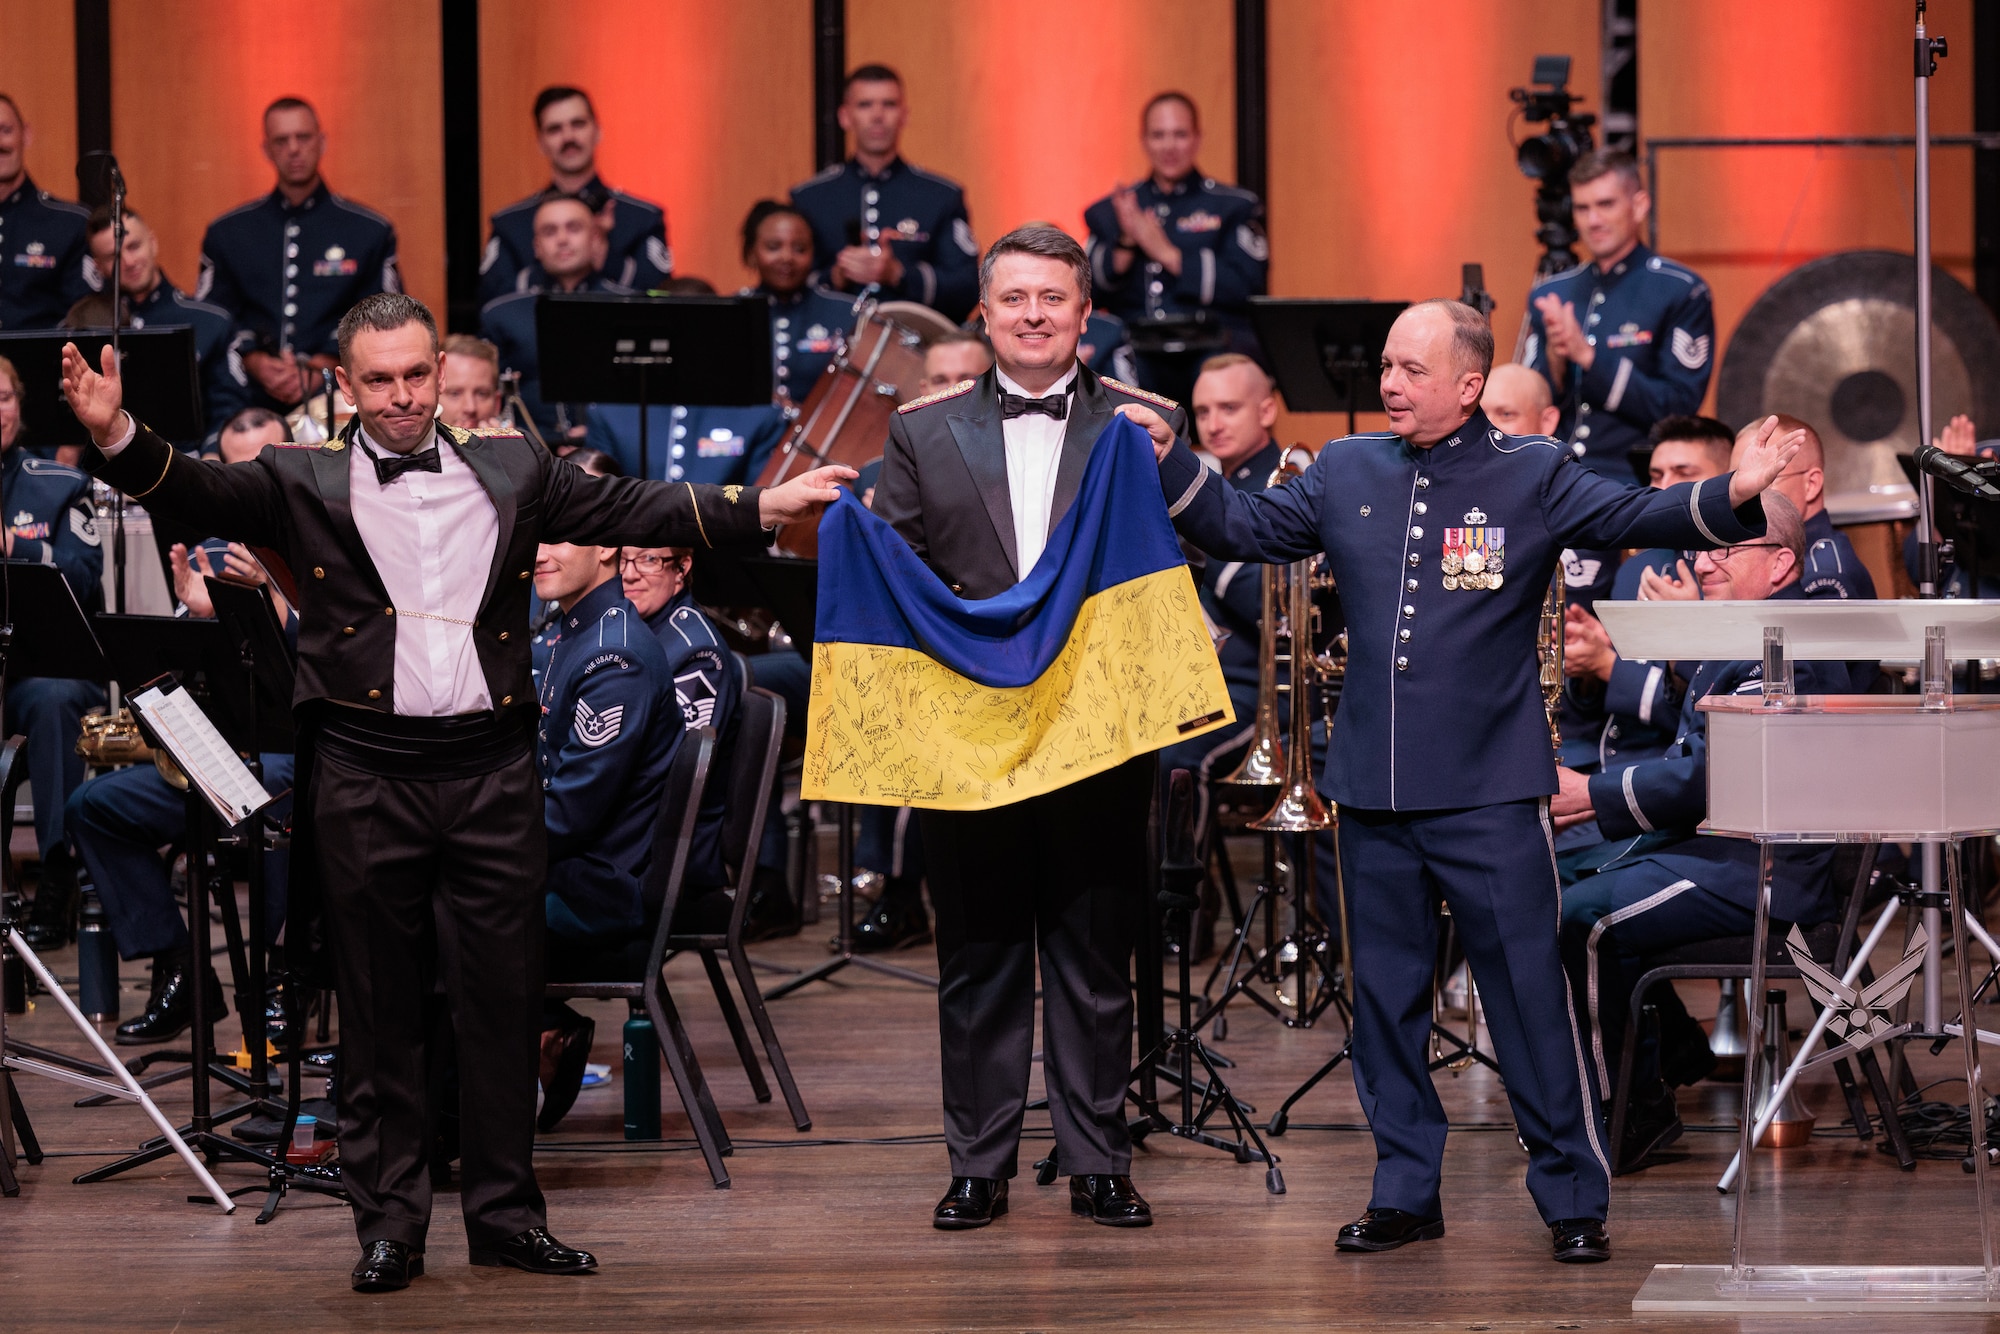 Conductor holds Ukrainian flag at concert